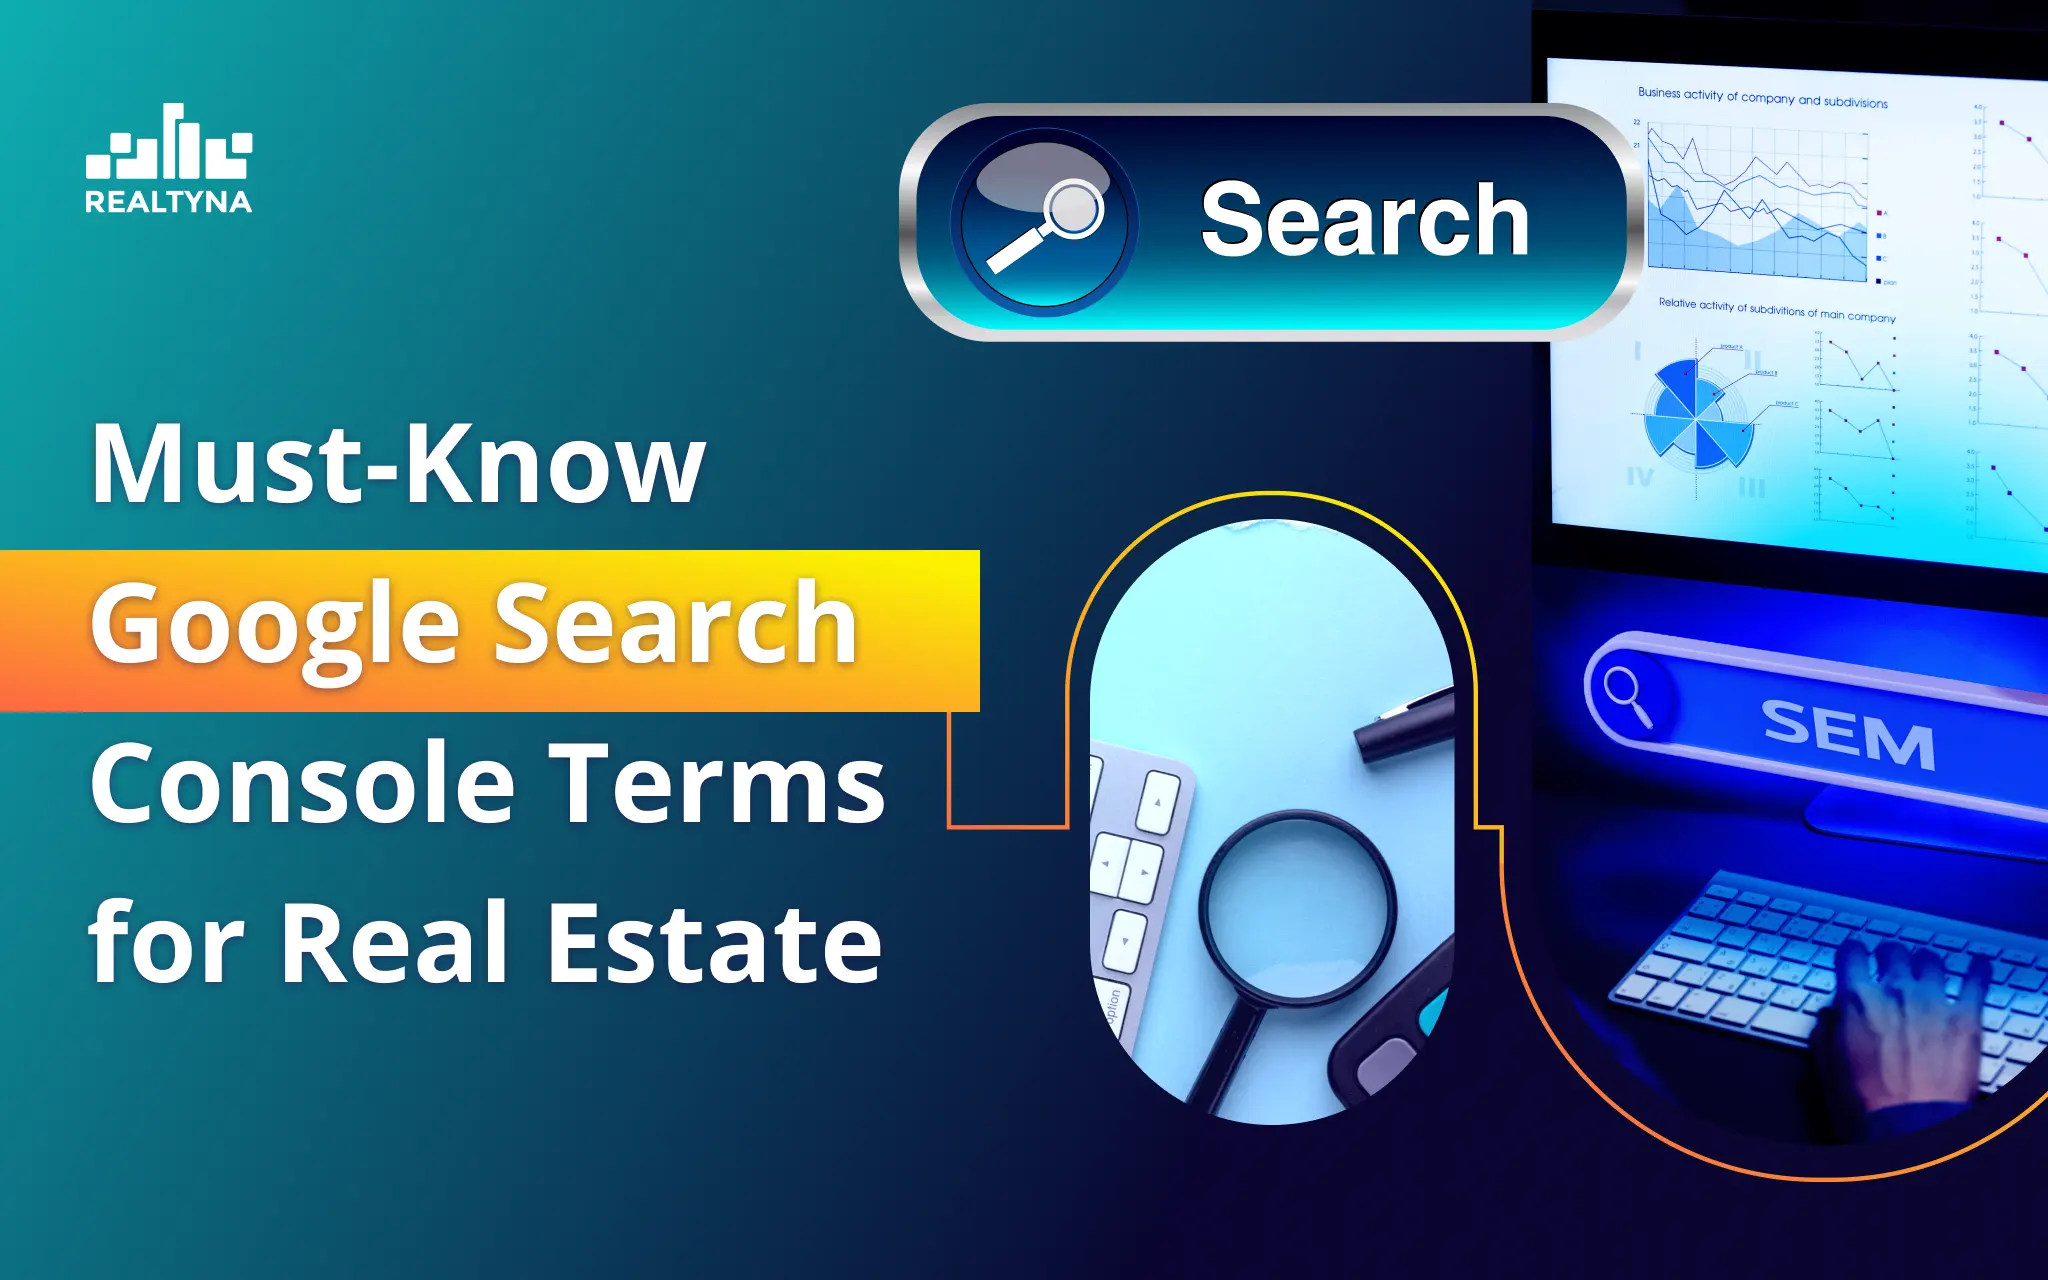 Must-Know Google Search Console Terms for Real Estate Websites